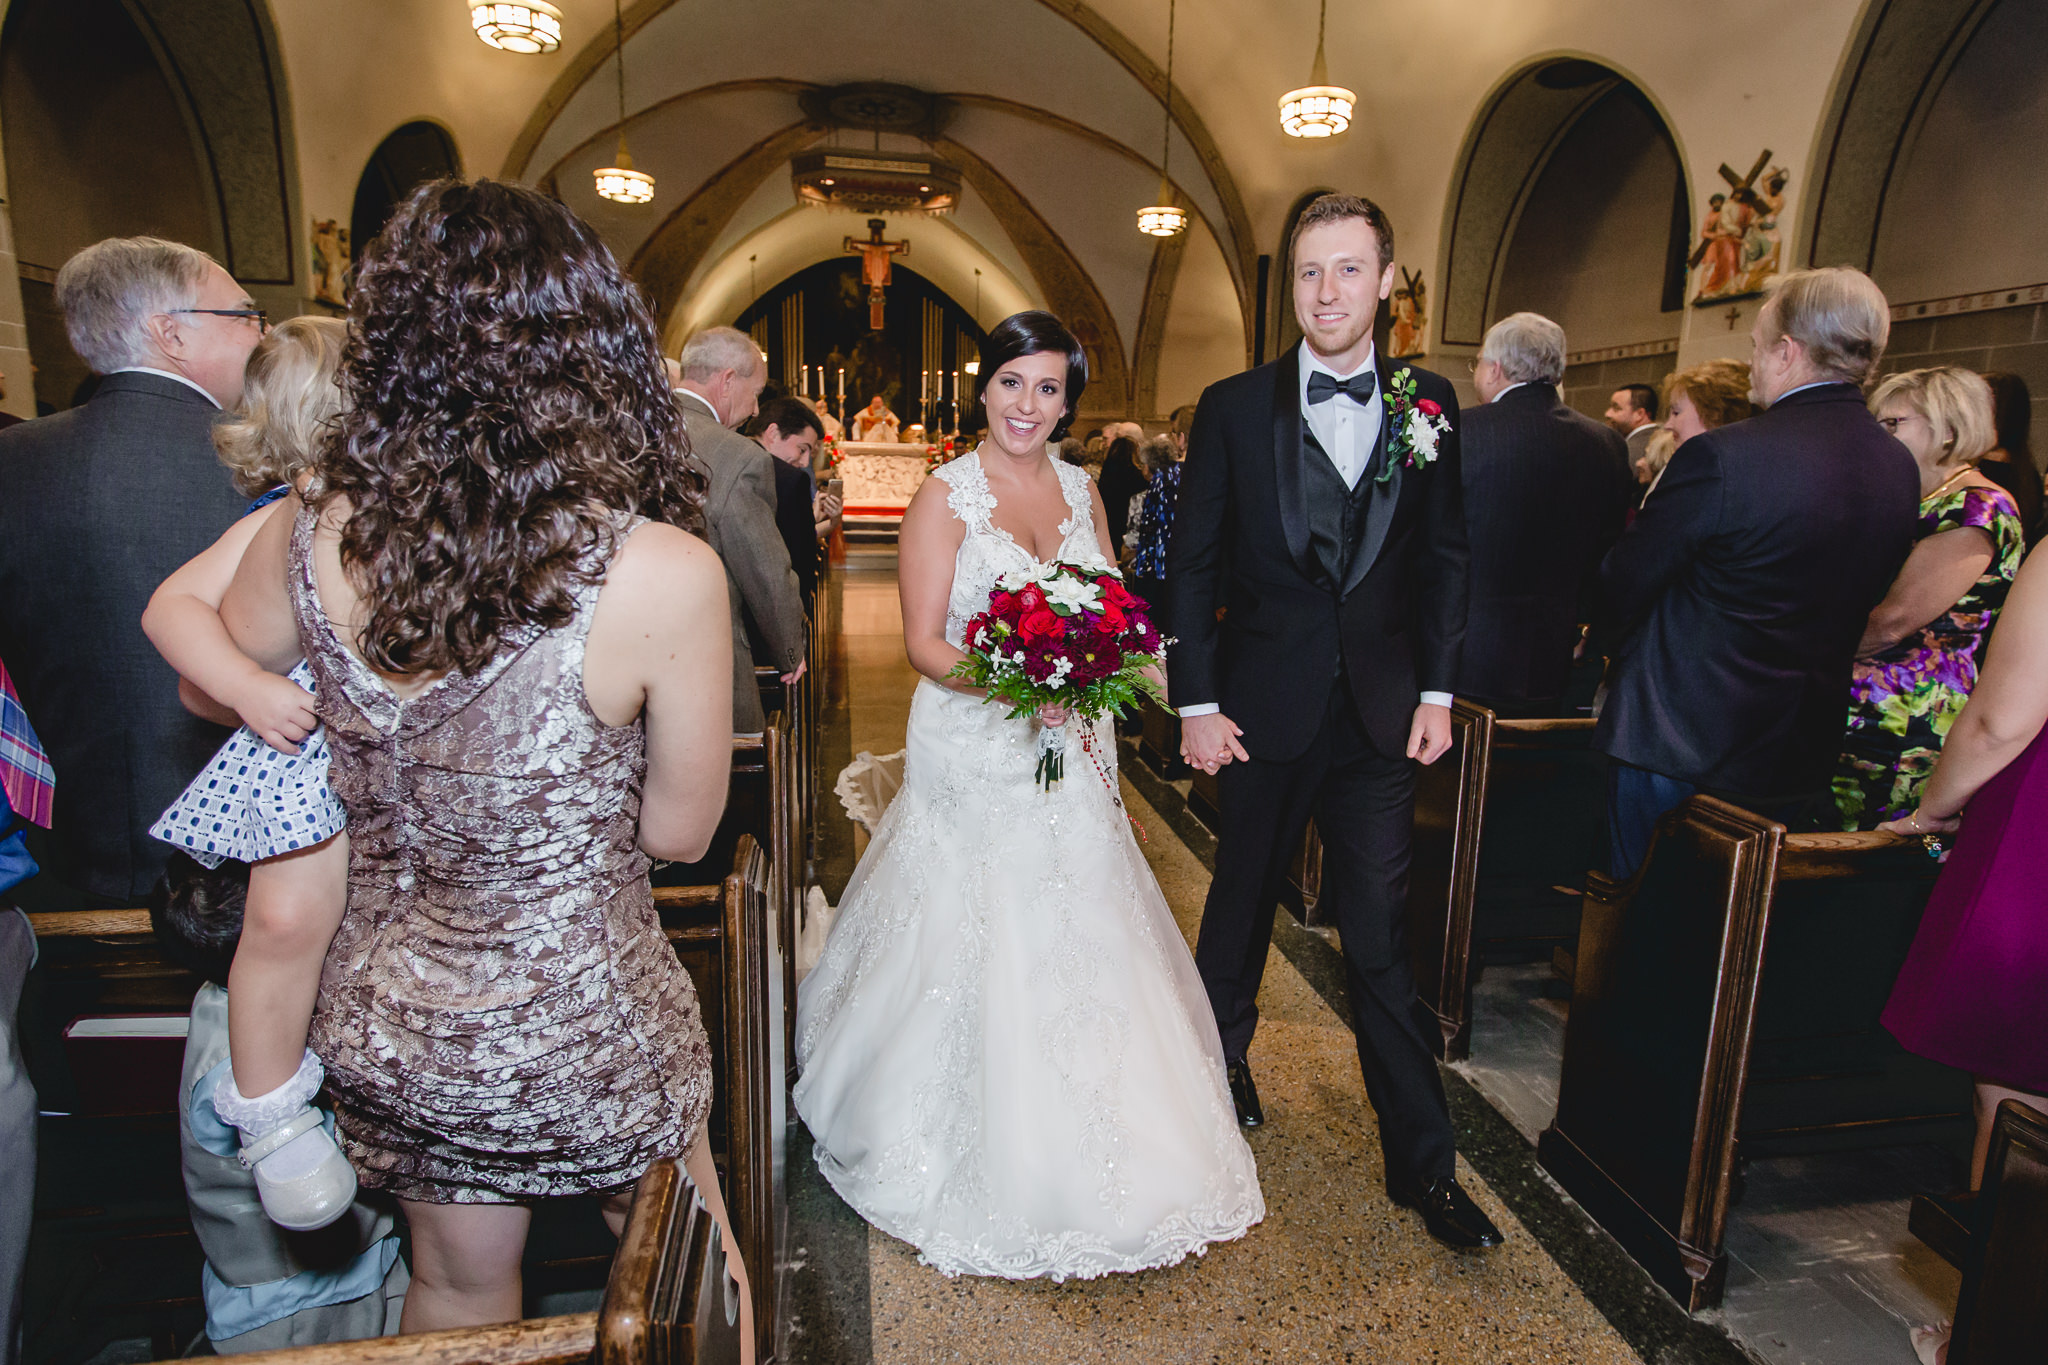 Newlyweds exit their wedding ceremony at St. John the Baptist